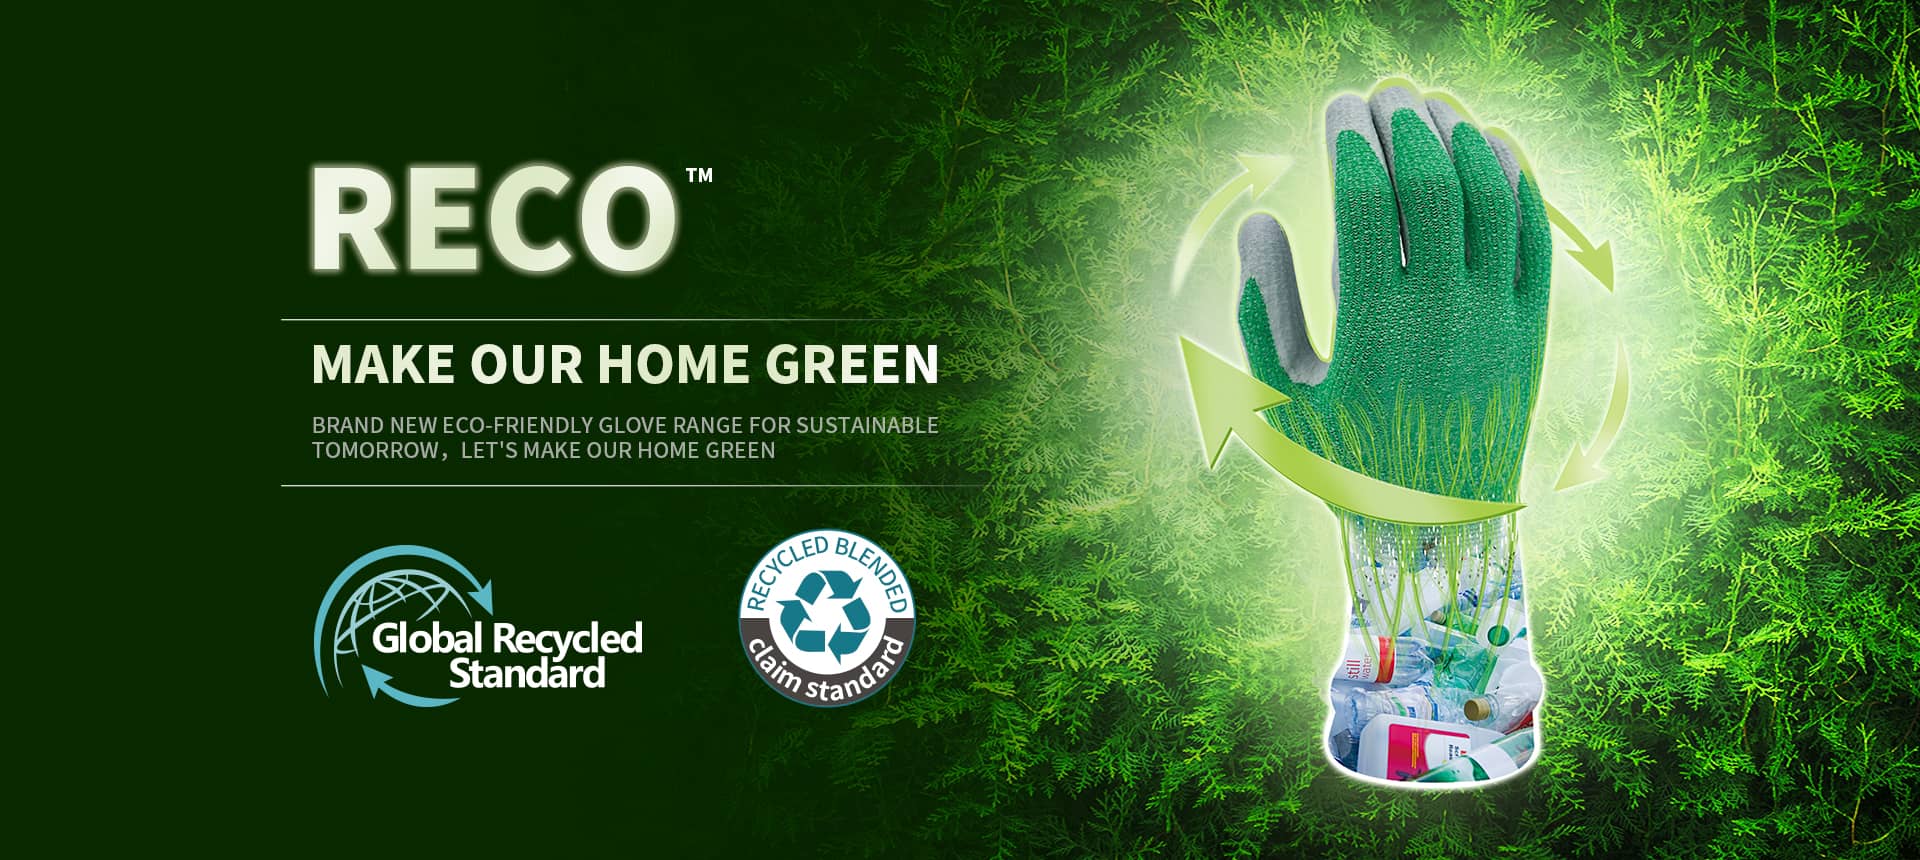 MAKE OUR HOME GREEN